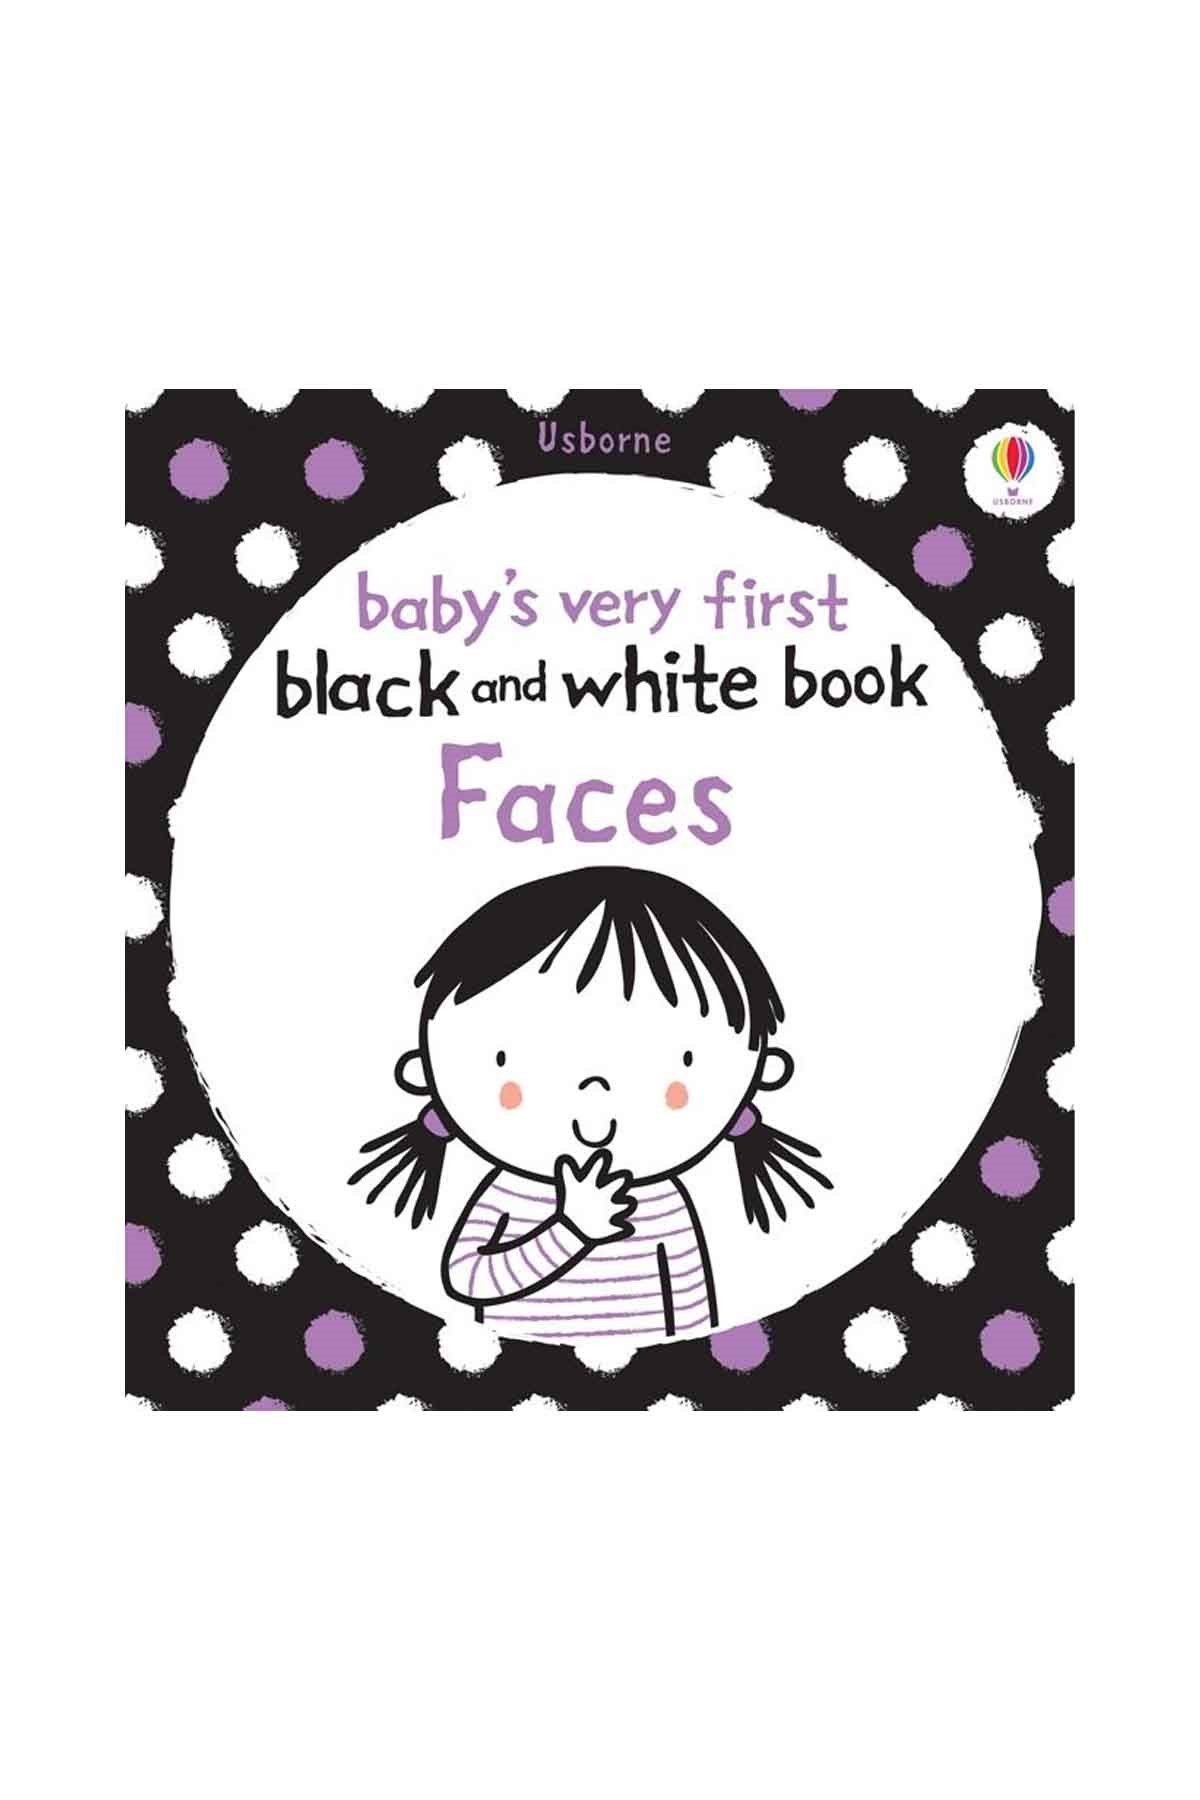 The Usborne Baby's Very First Black And White Book Faces